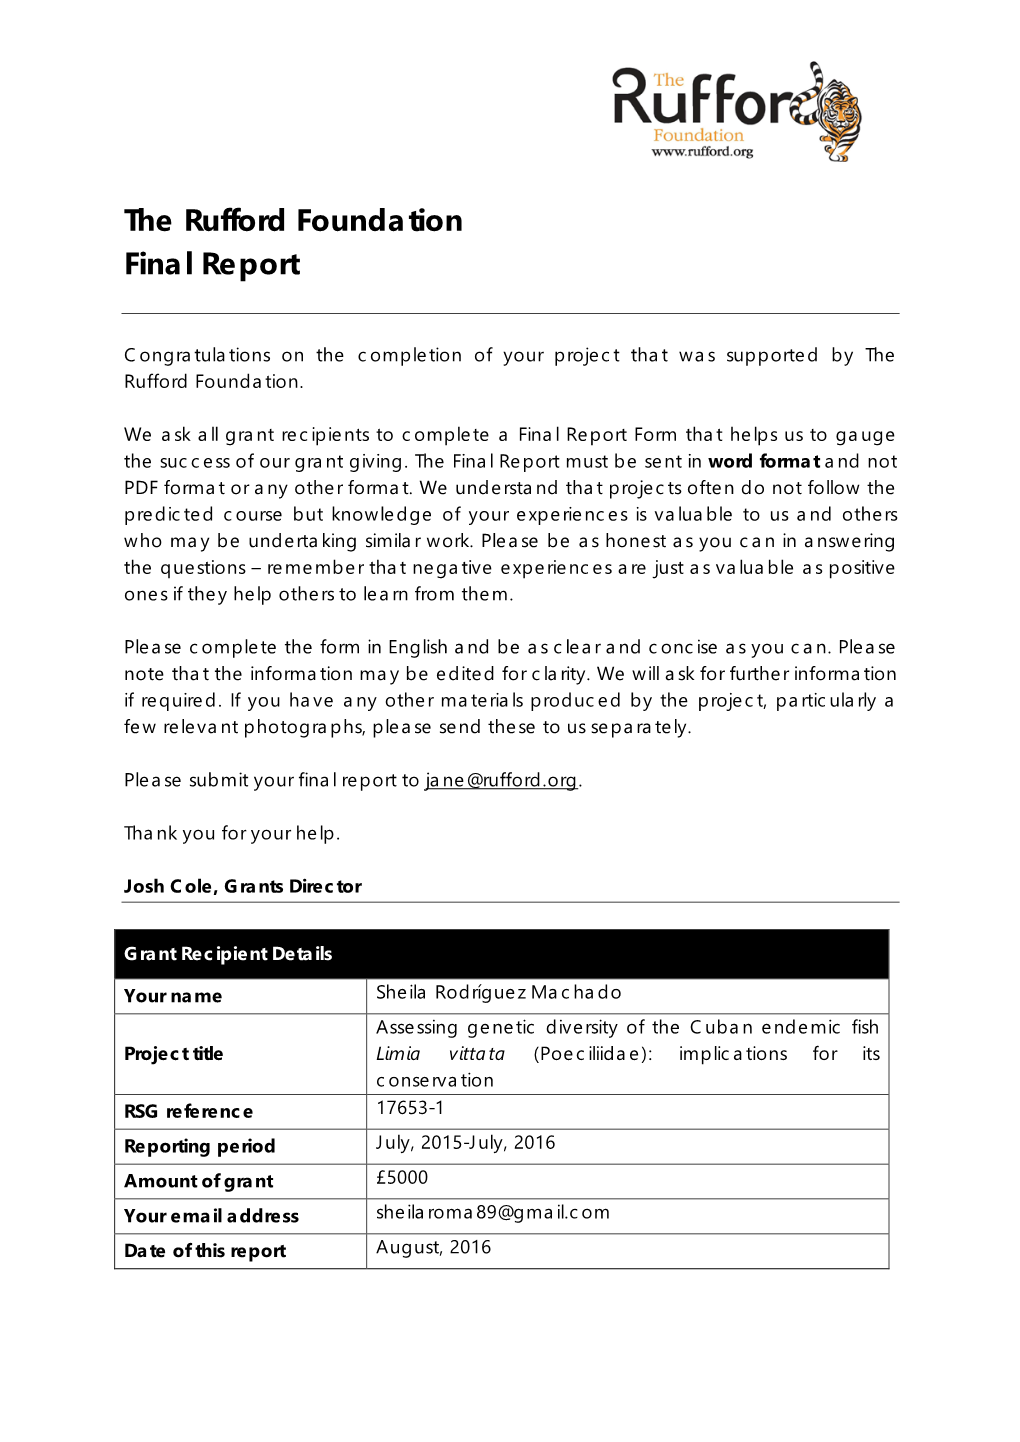 The Rufford Foundation Final Report